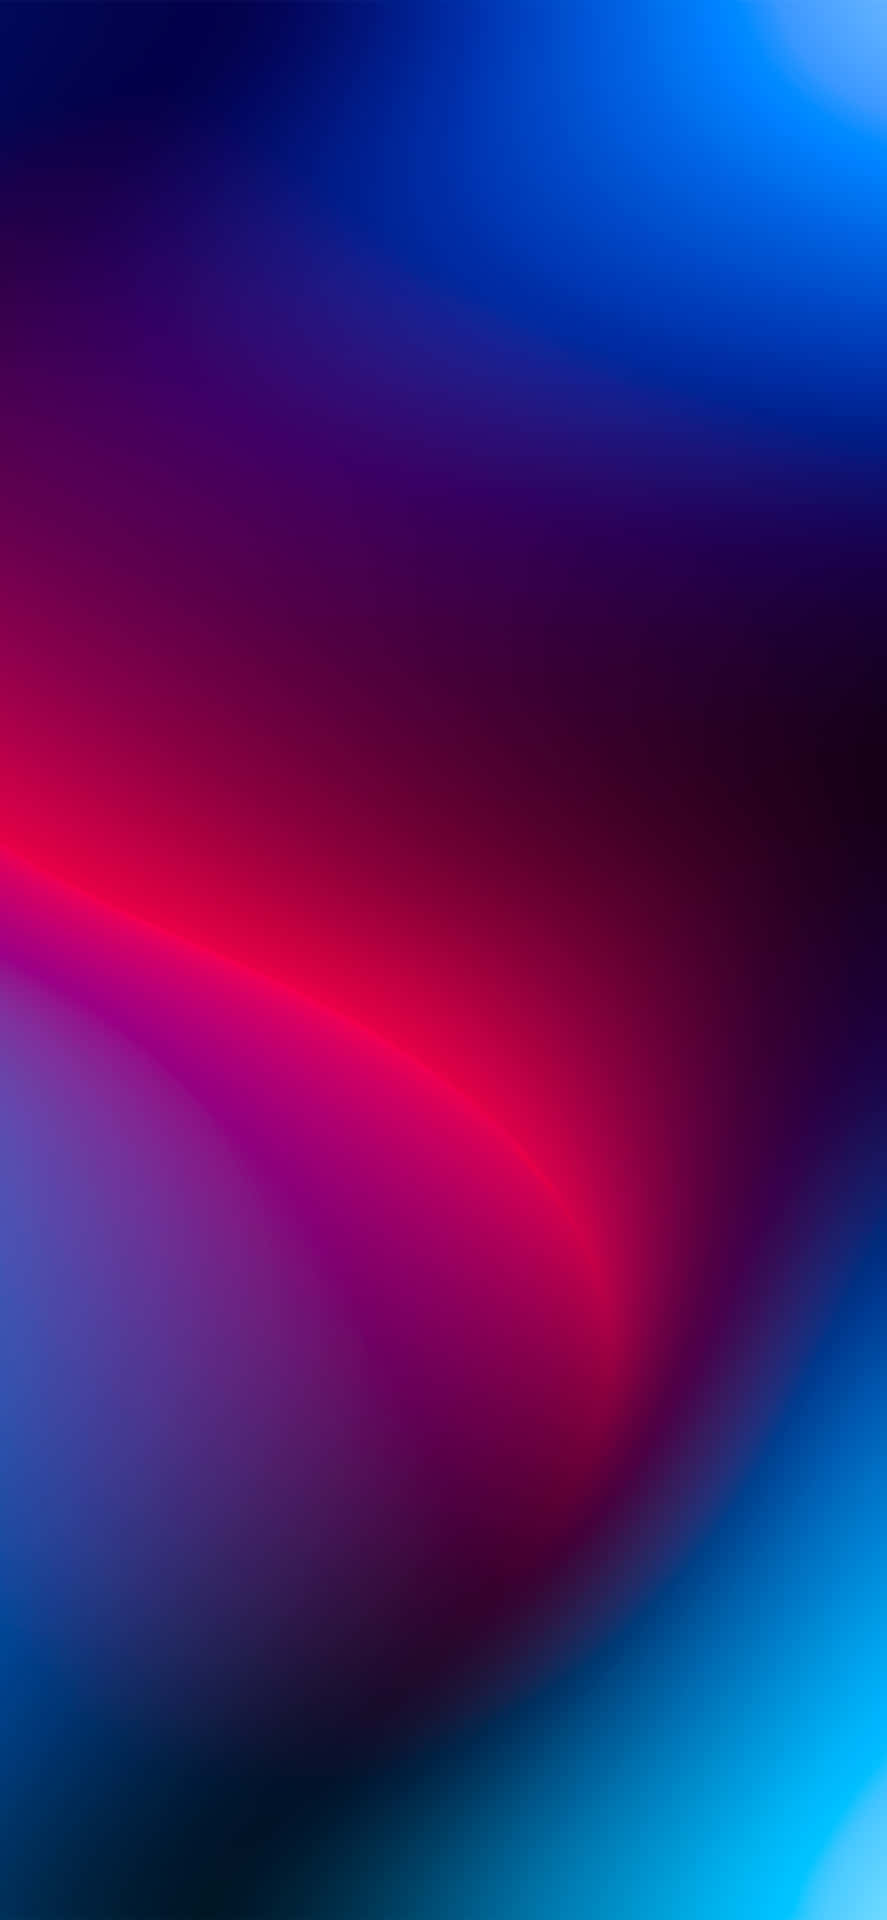 Dark Gradient With A Red Wave Wallpaper